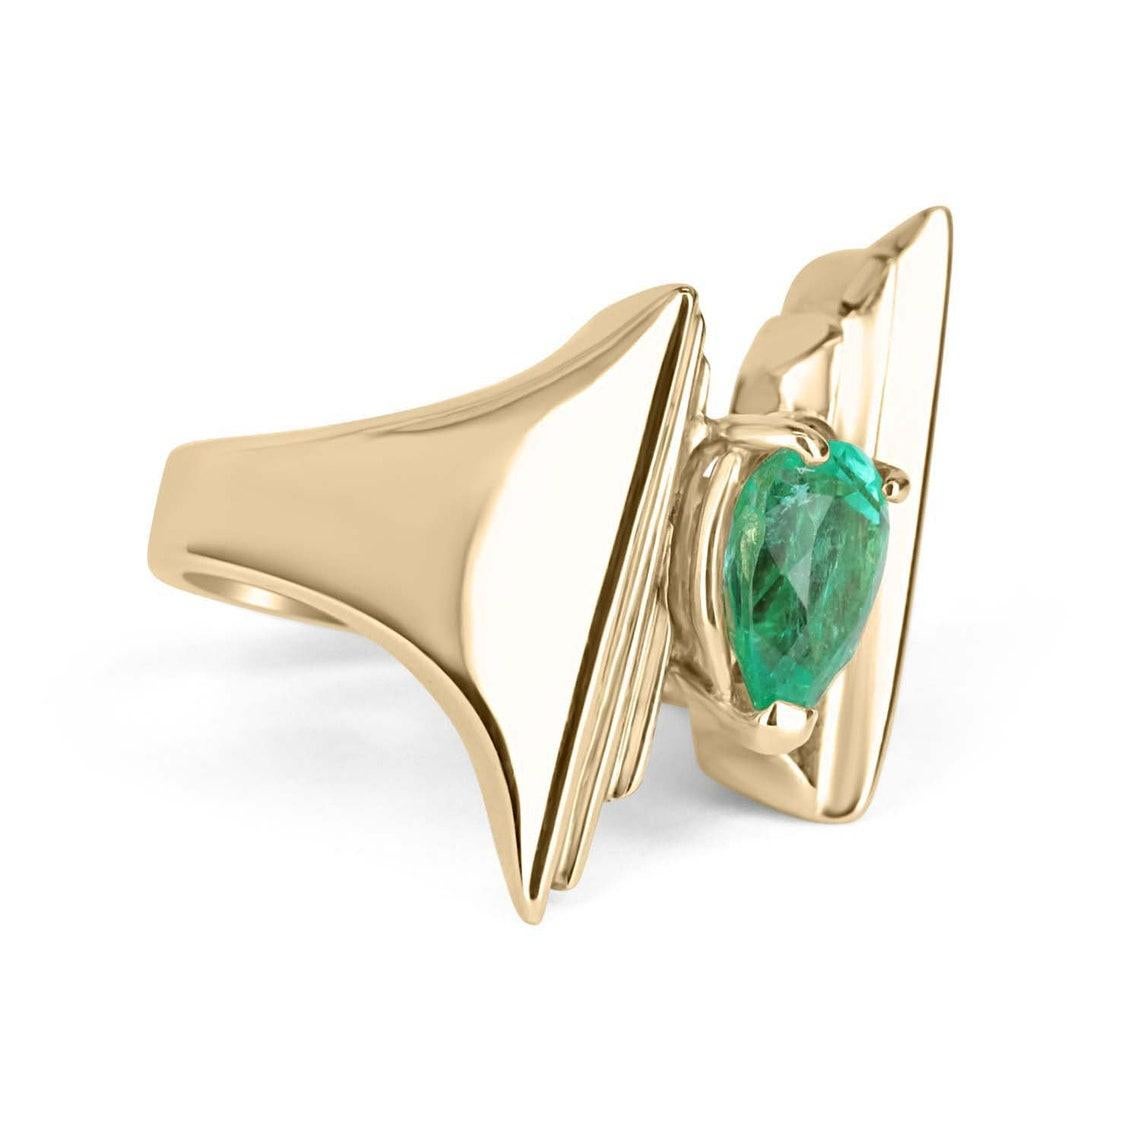 Displayed is a stunning fine quality Colombian emerald solitaire, pear-shaped statement ring in 14K yellow gold. This gorgeous solitaire ring carries a full 2.80-carat emerald in a three prong setting. Fully faceted, this gemstone showcases